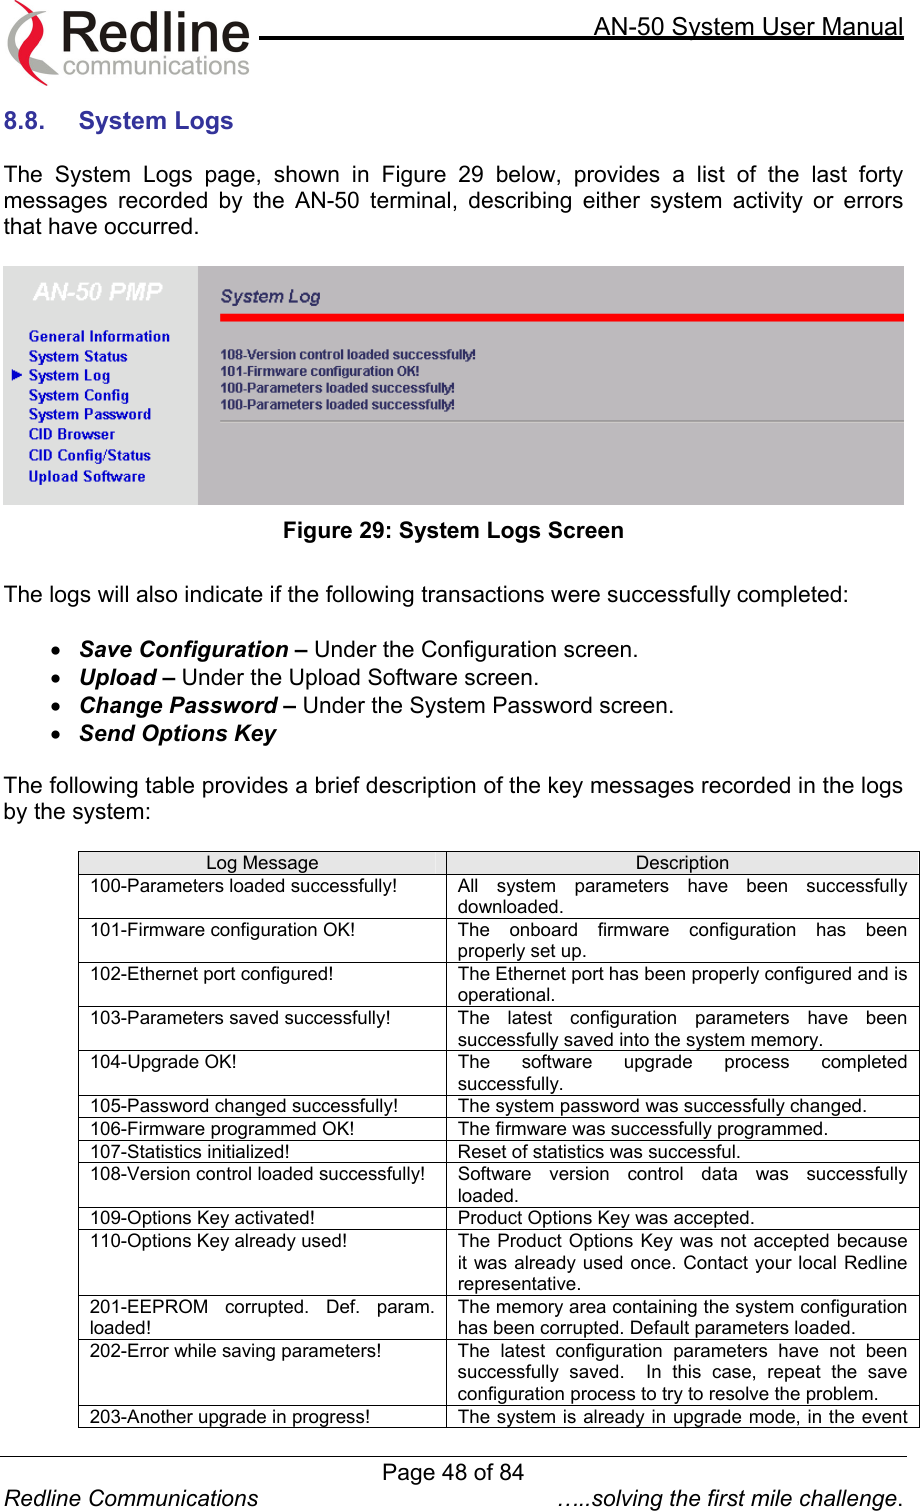     AN-50 System User Manual  Redline Communications  …..solving the first mile challenge. 8.8. System Logs  The System Logs page, shown in Figure 29 below, provides a list of the last forty messages recorded by the AN-50 terminal, describing either system activity or errors that have occurred.    Figure 29: System Logs Screen  The logs will also indicate if the following transactions were successfully completed:  •  Save Configuration – Under the Configuration screen. •  Upload – Under the Upload Software screen. •  Change Password – Under the System Password screen. •  Send Options Key  The following table provides a brief description of the key messages recorded in the logs by the system:  Log Message  Description 100-Parameters loaded successfully!  All system parameters have been successfully downloaded. 101-Firmware configuration OK!  The  onboard firmware configuration has been properly set up. 102-Ethernet port configured!  The Ethernet port has been properly configured and is operational. 103-Parameters saved successfully!  The latest configuration parameters have been successfully saved into the system memory. 104-Upgrade OK!  The software upgrade process completed successfully. 105-Password changed successfully!    The system password was successfully changed. 106-Firmware programmed OK!  The firmware was successfully programmed. 107-Statistics initialized!  Reset of statistics was successful. 108-Version control loaded successfully!  Software  version  control  data  was  successfully loaded. 109-Options Key activated!  Product Options Key was accepted. 110-Options Key already used!  The Product Options Key was not accepted because it was already used once. Contact your local Redline representative. 201-EEPROM corrupted. Def. param. loaded! The memory area containing the system configuration has been corrupted. Default parameters loaded.  202-Error while saving parameters!  The  latest configuration parameters have not been successfully saved.  In this case, repeat the save configuration process to try to resolve the problem. 203-Another upgrade in progress!    The system is already in upgrade mode, in the event Page 48 of 84